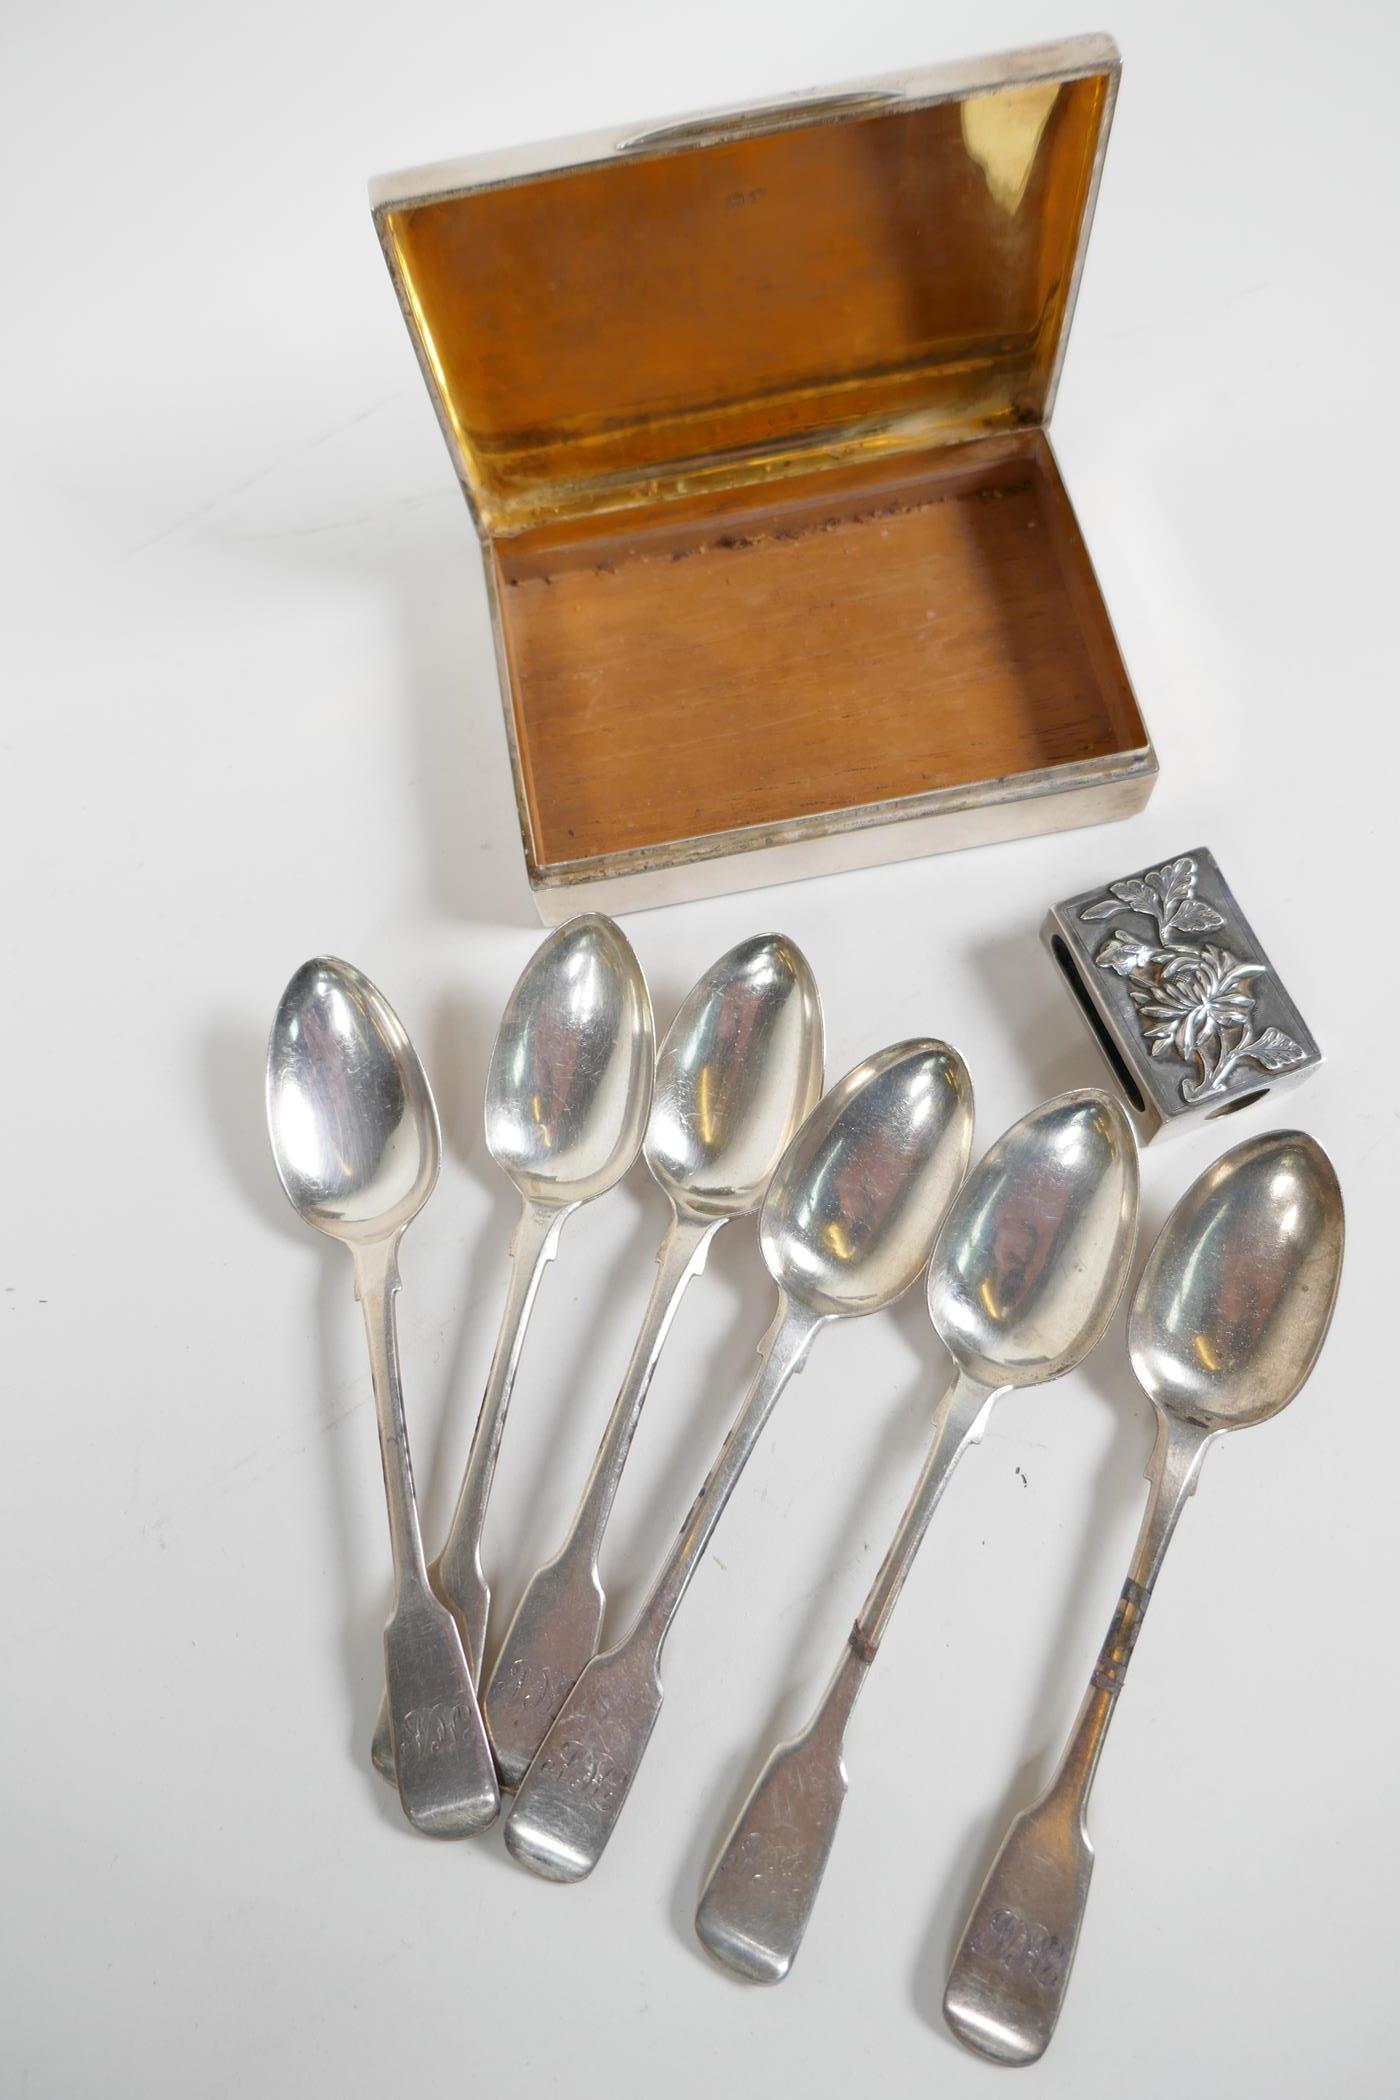 A hallmarked silver cigarette box (Birmingham 1922), together with a set of six hallmarked